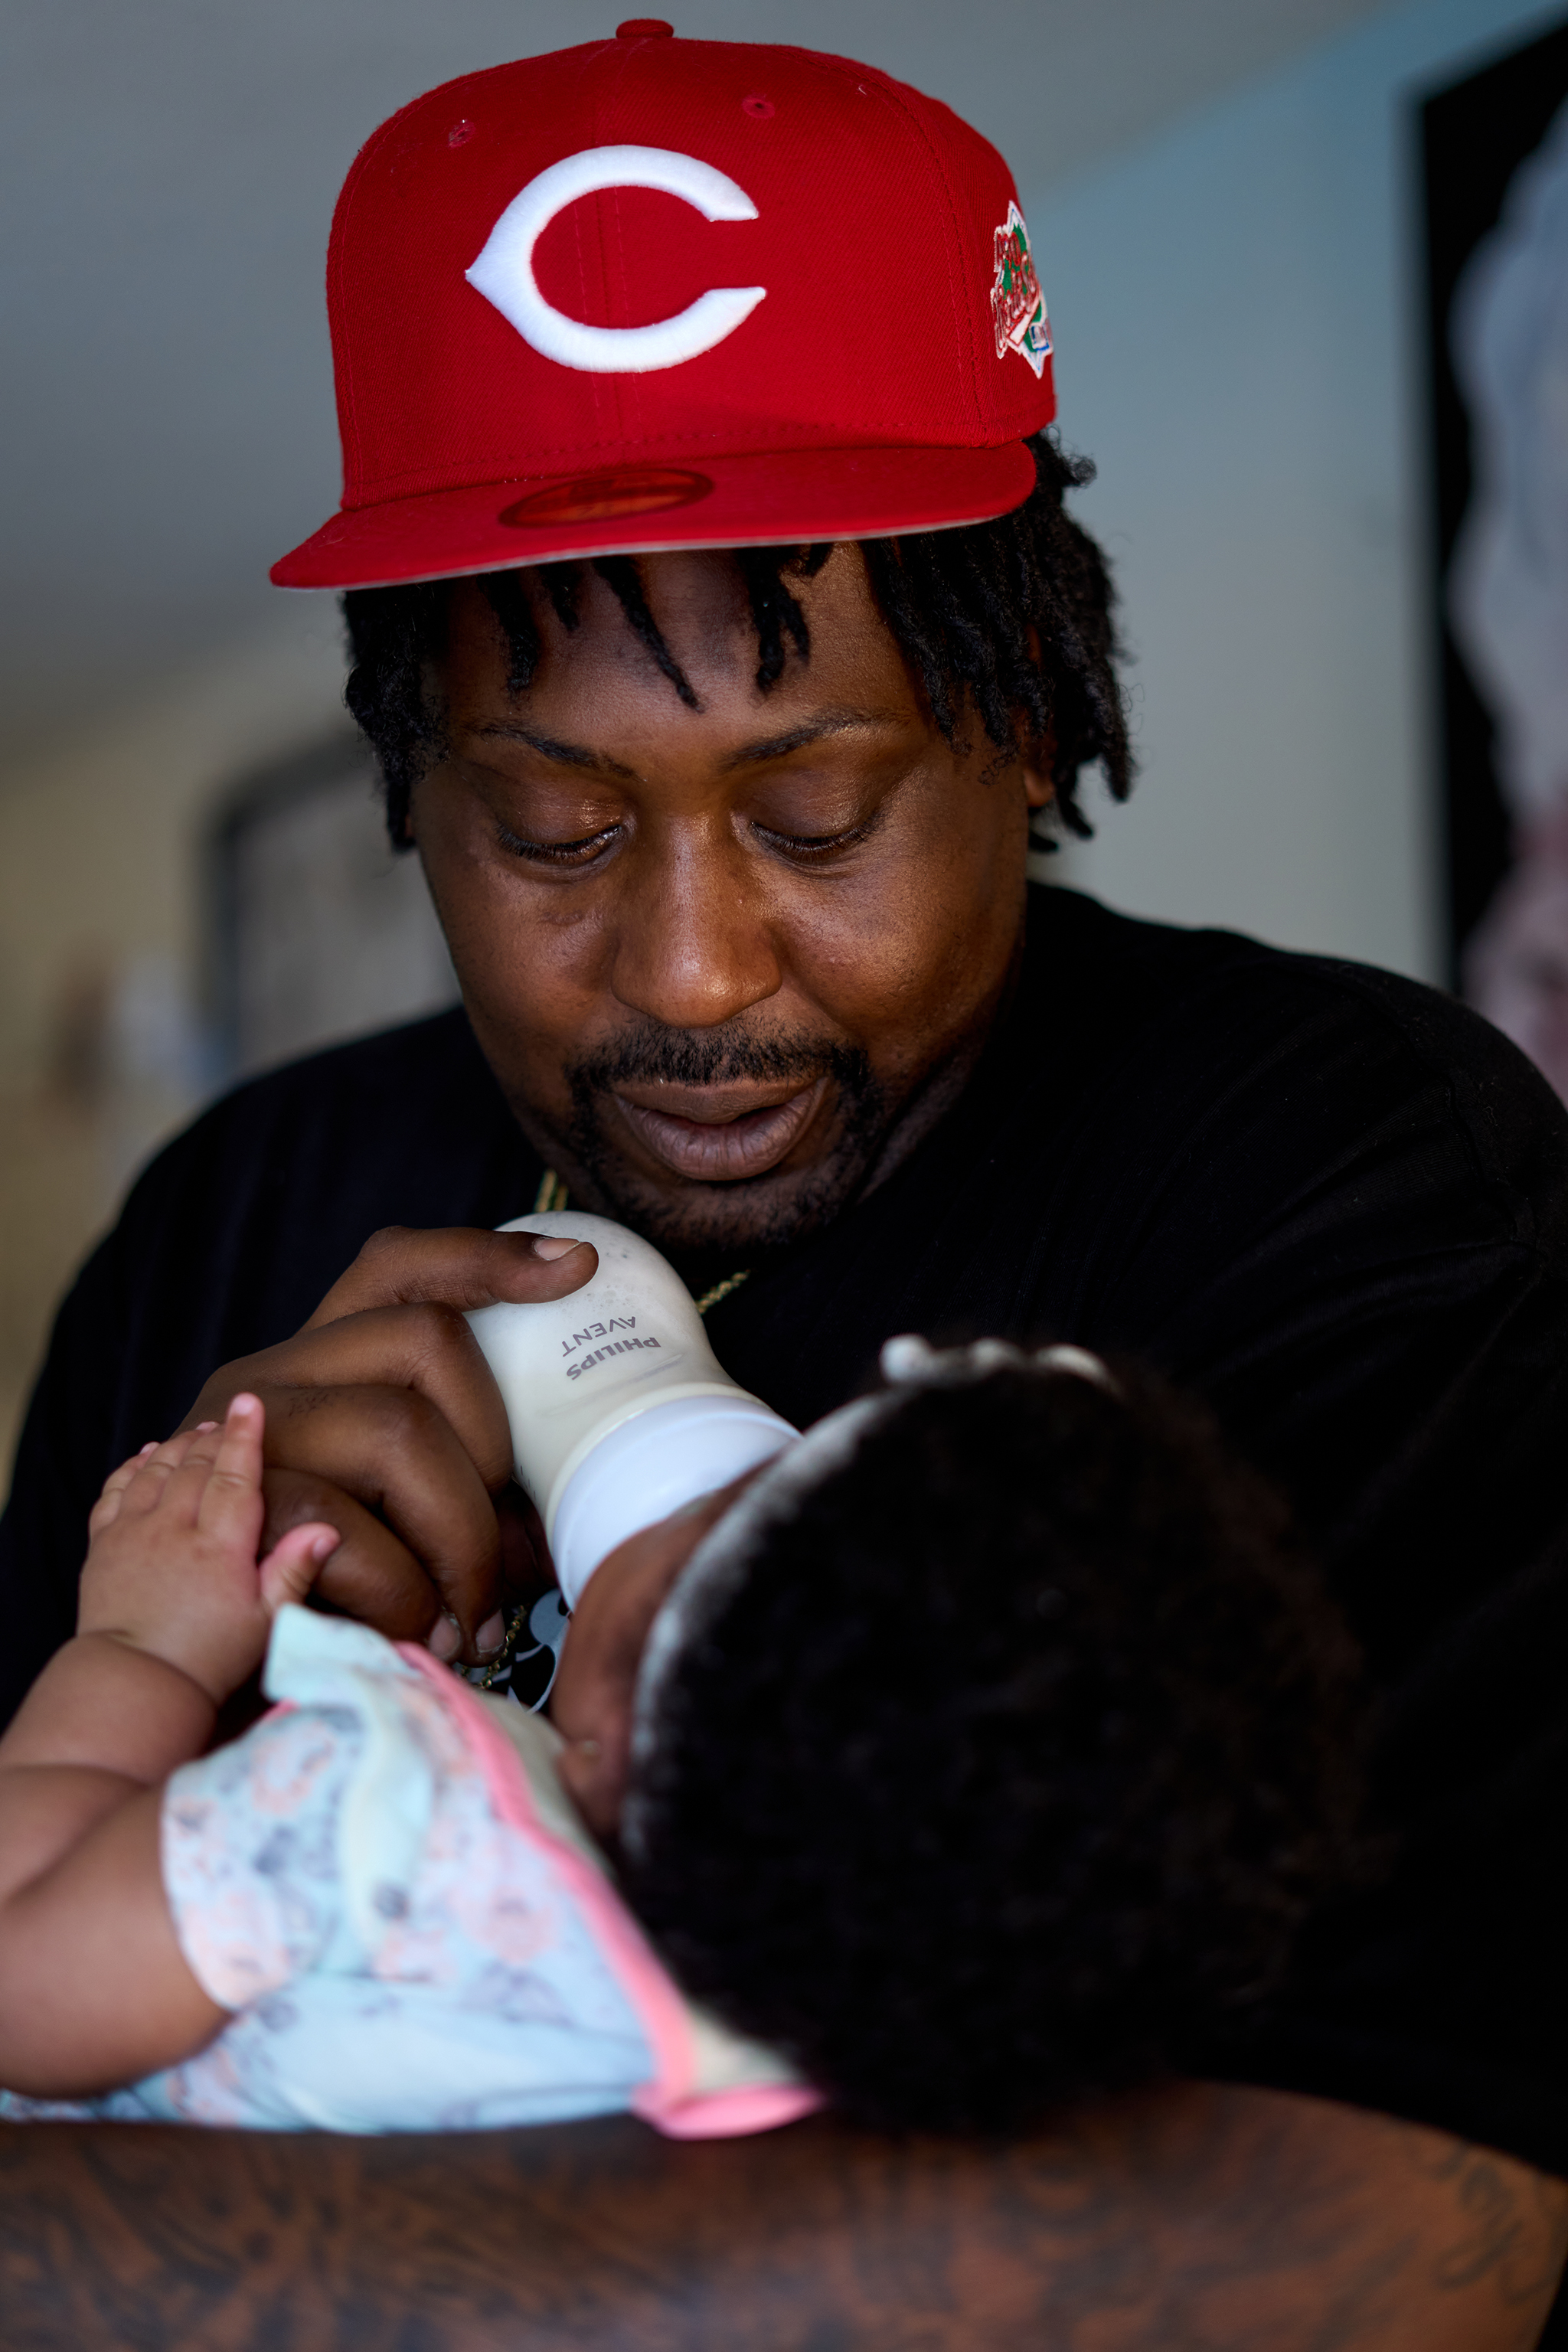 A Black man in a red sports cap cradles a newborn baby and feeds it a bottle